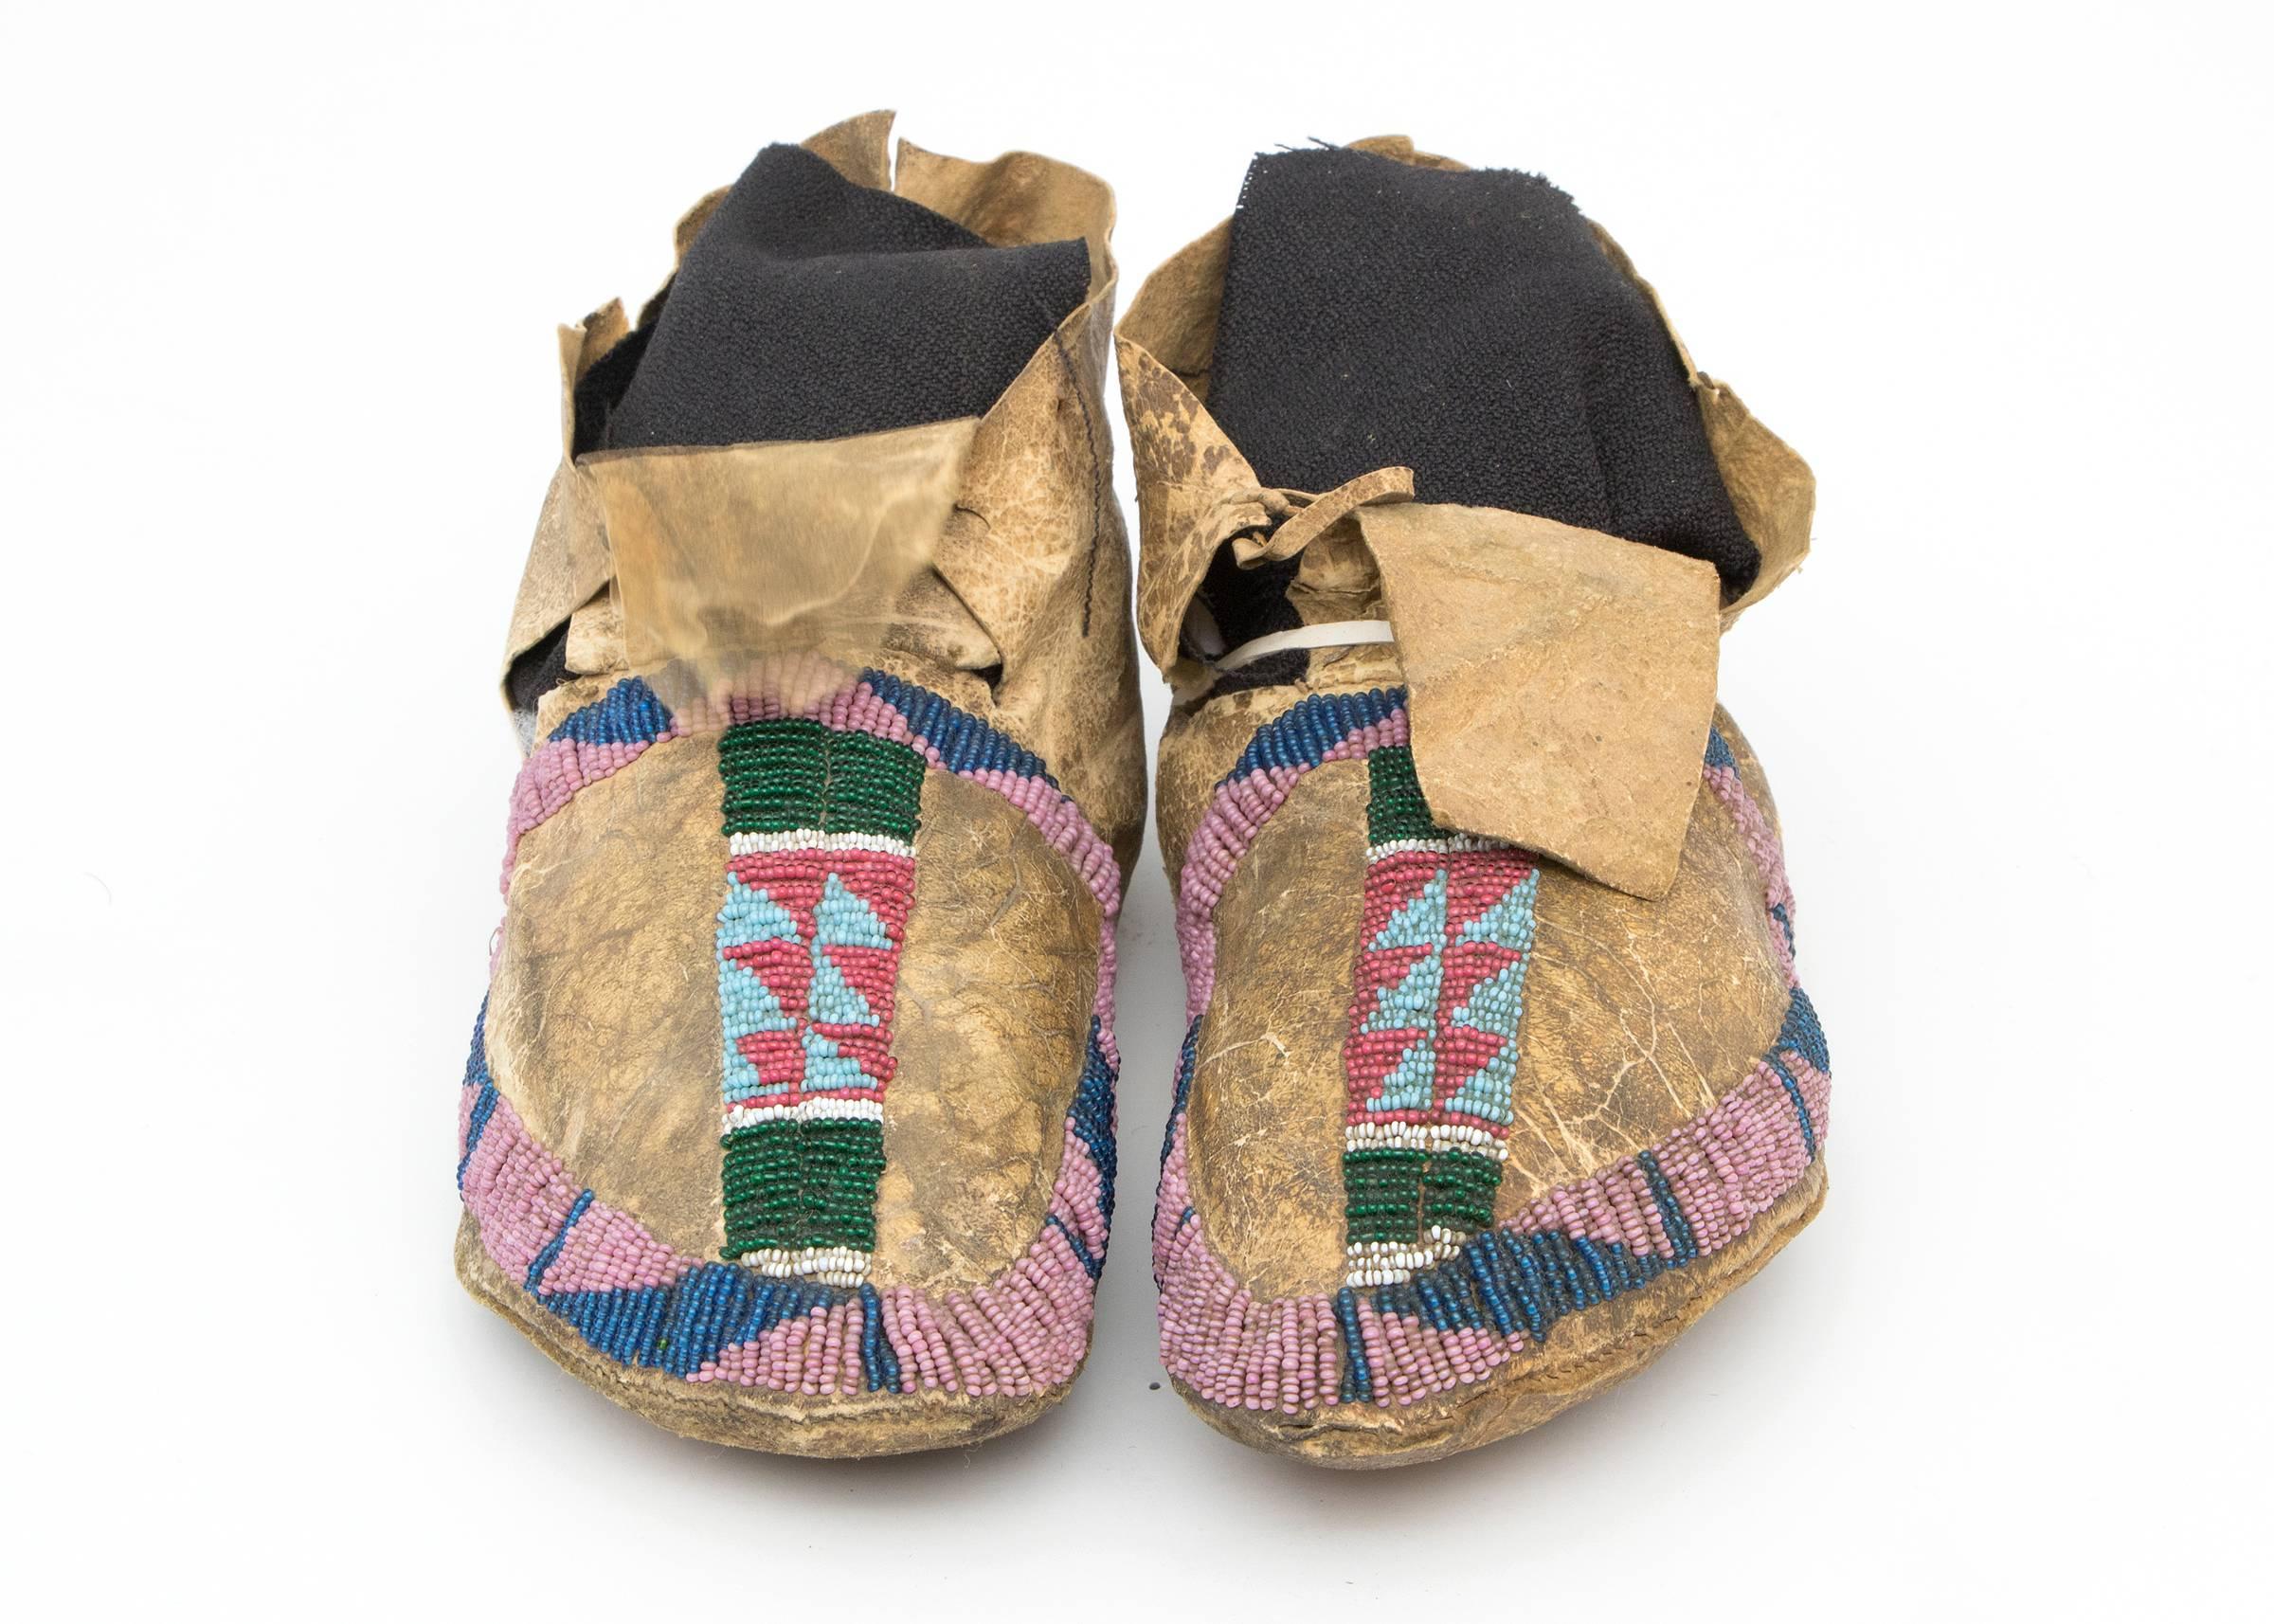 A pair of late Classic period moccasins made for a youth or child. Constructed of native tanned hide and partially beaded around the vamps creating buffalo track motifs in the negative area. Geometric patterns of blue, pink, red and green trade